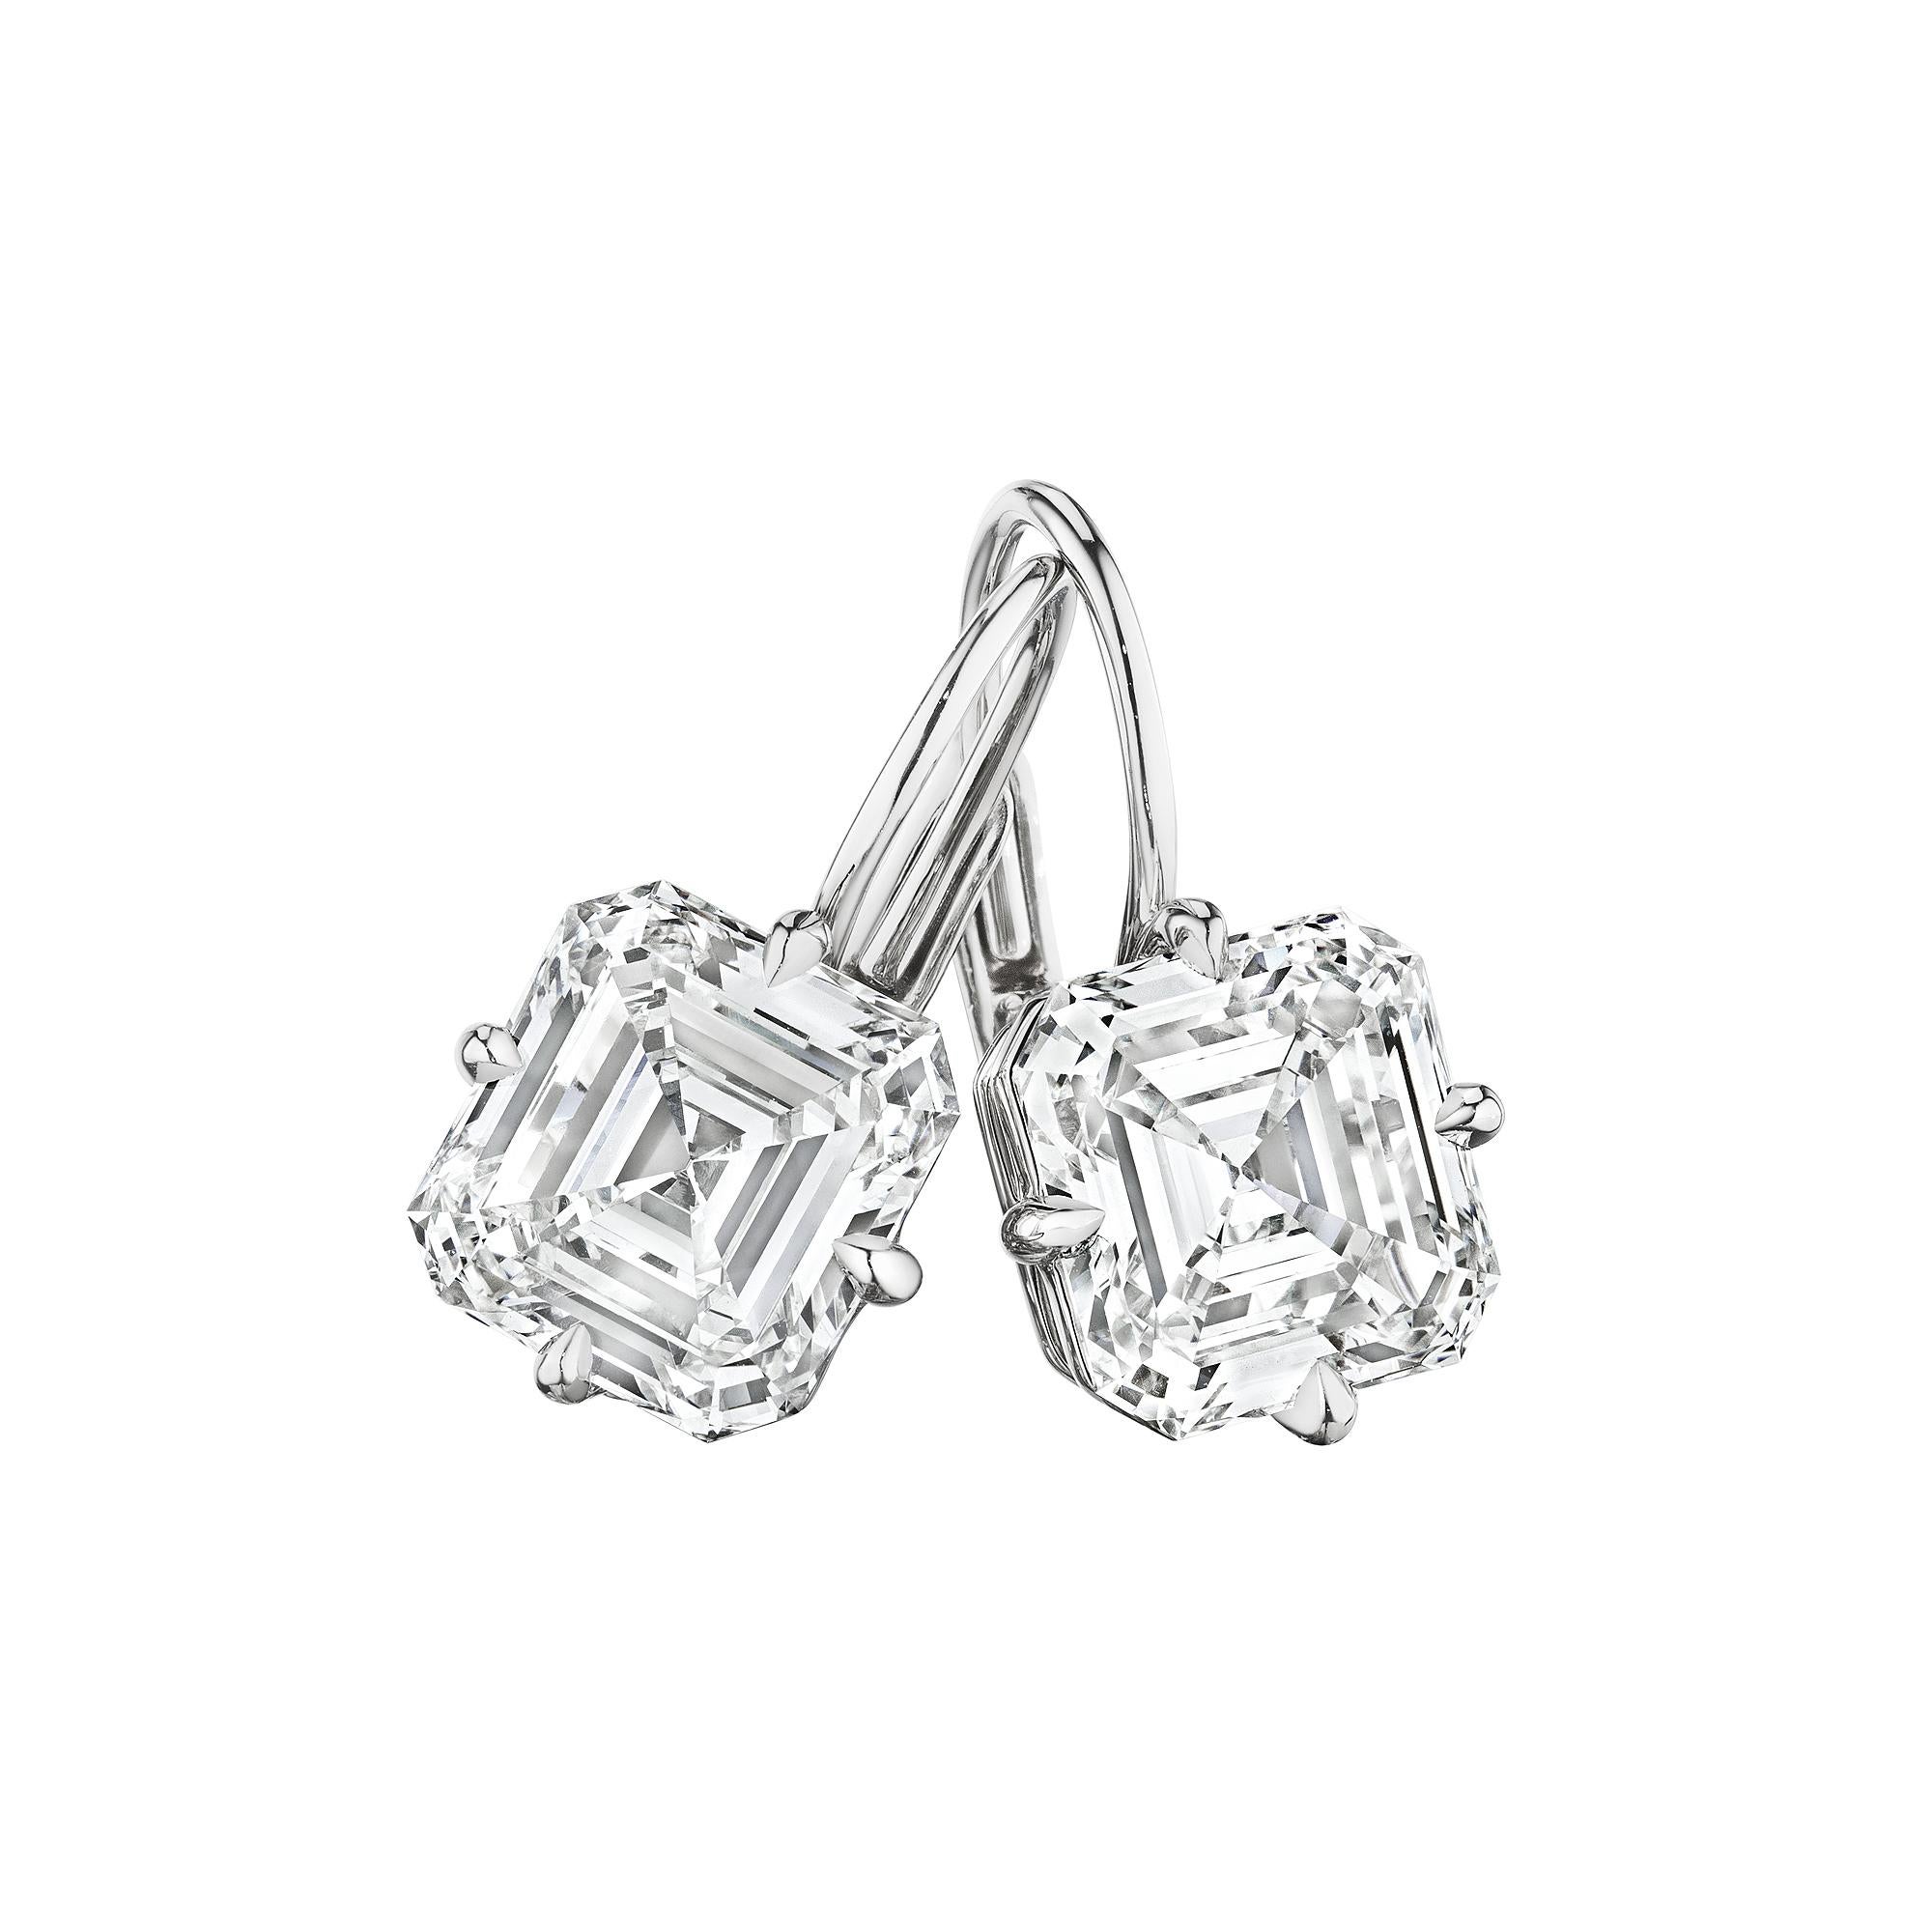 Rare to find and magnificent when worn, these total weight 4.06 carat Asscher cut diamond drop platinum earrings are simply extraordinary.  Diamond color H-I.  Clarity VS2. GIA certified #5222313172 and #6227313181. Designed by Steven Fox Jewelry.